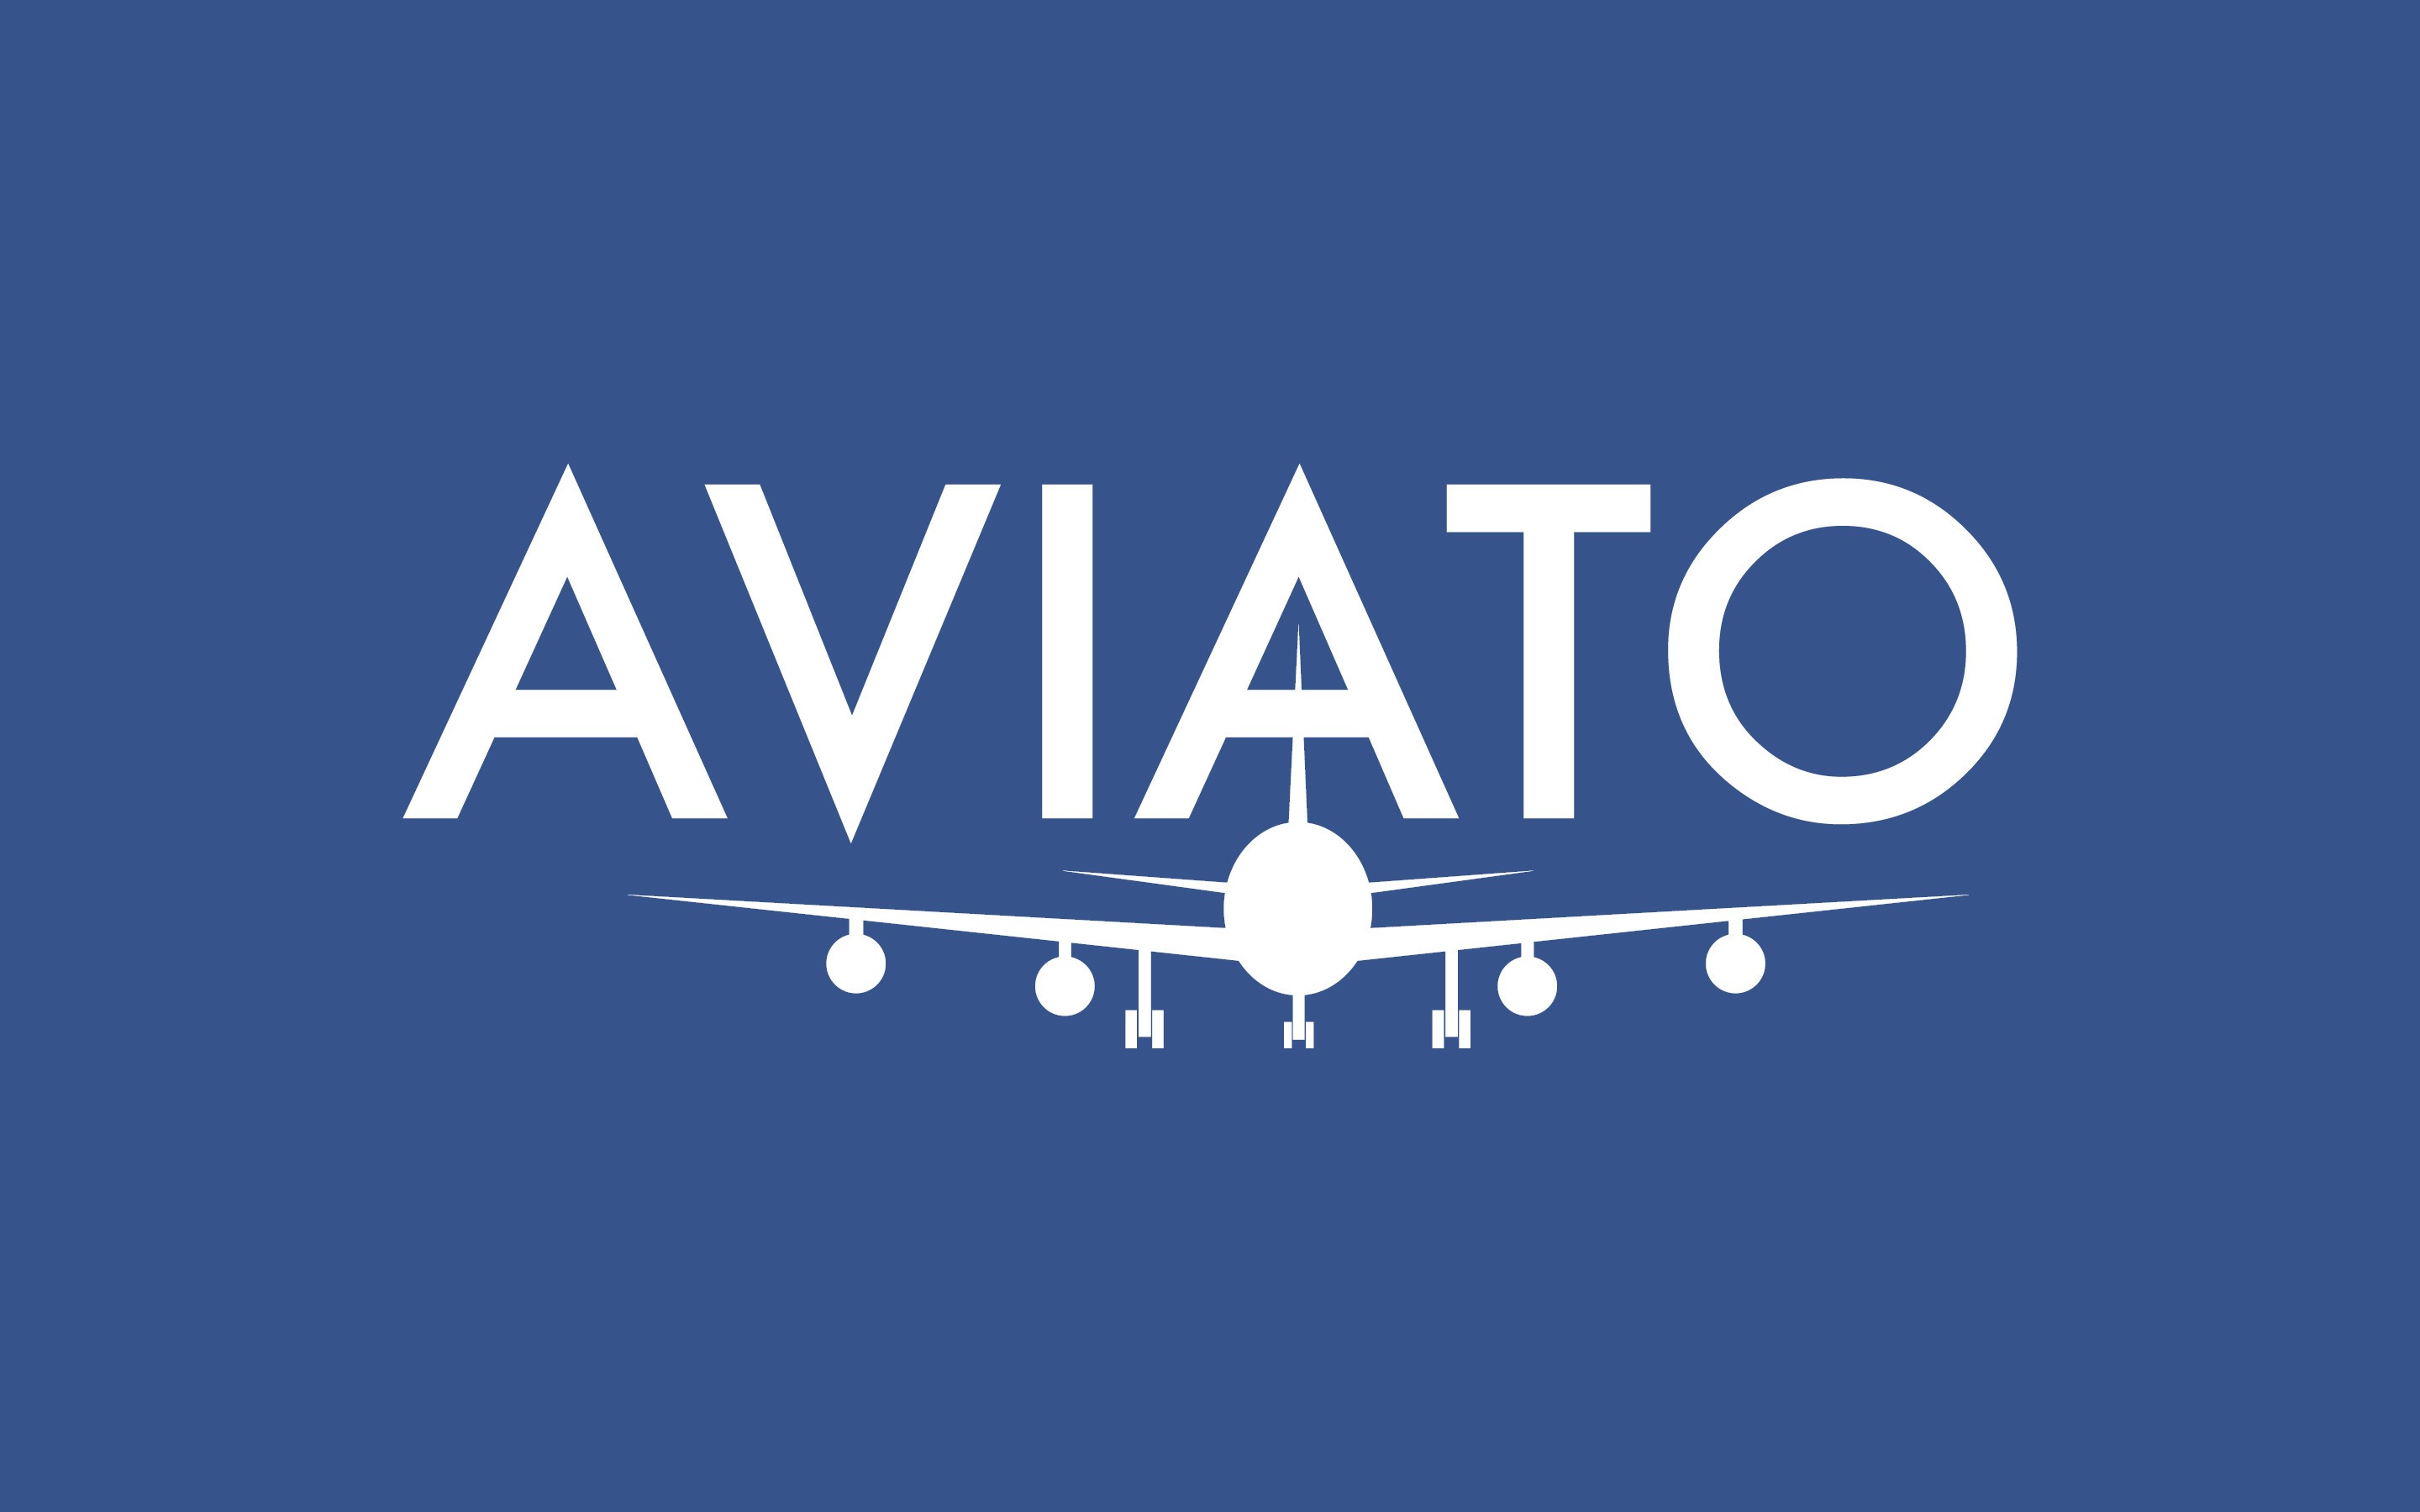 General 2880x1800 Aviato Silicon Valley HBO TV series aircraft blue background simple background digital art